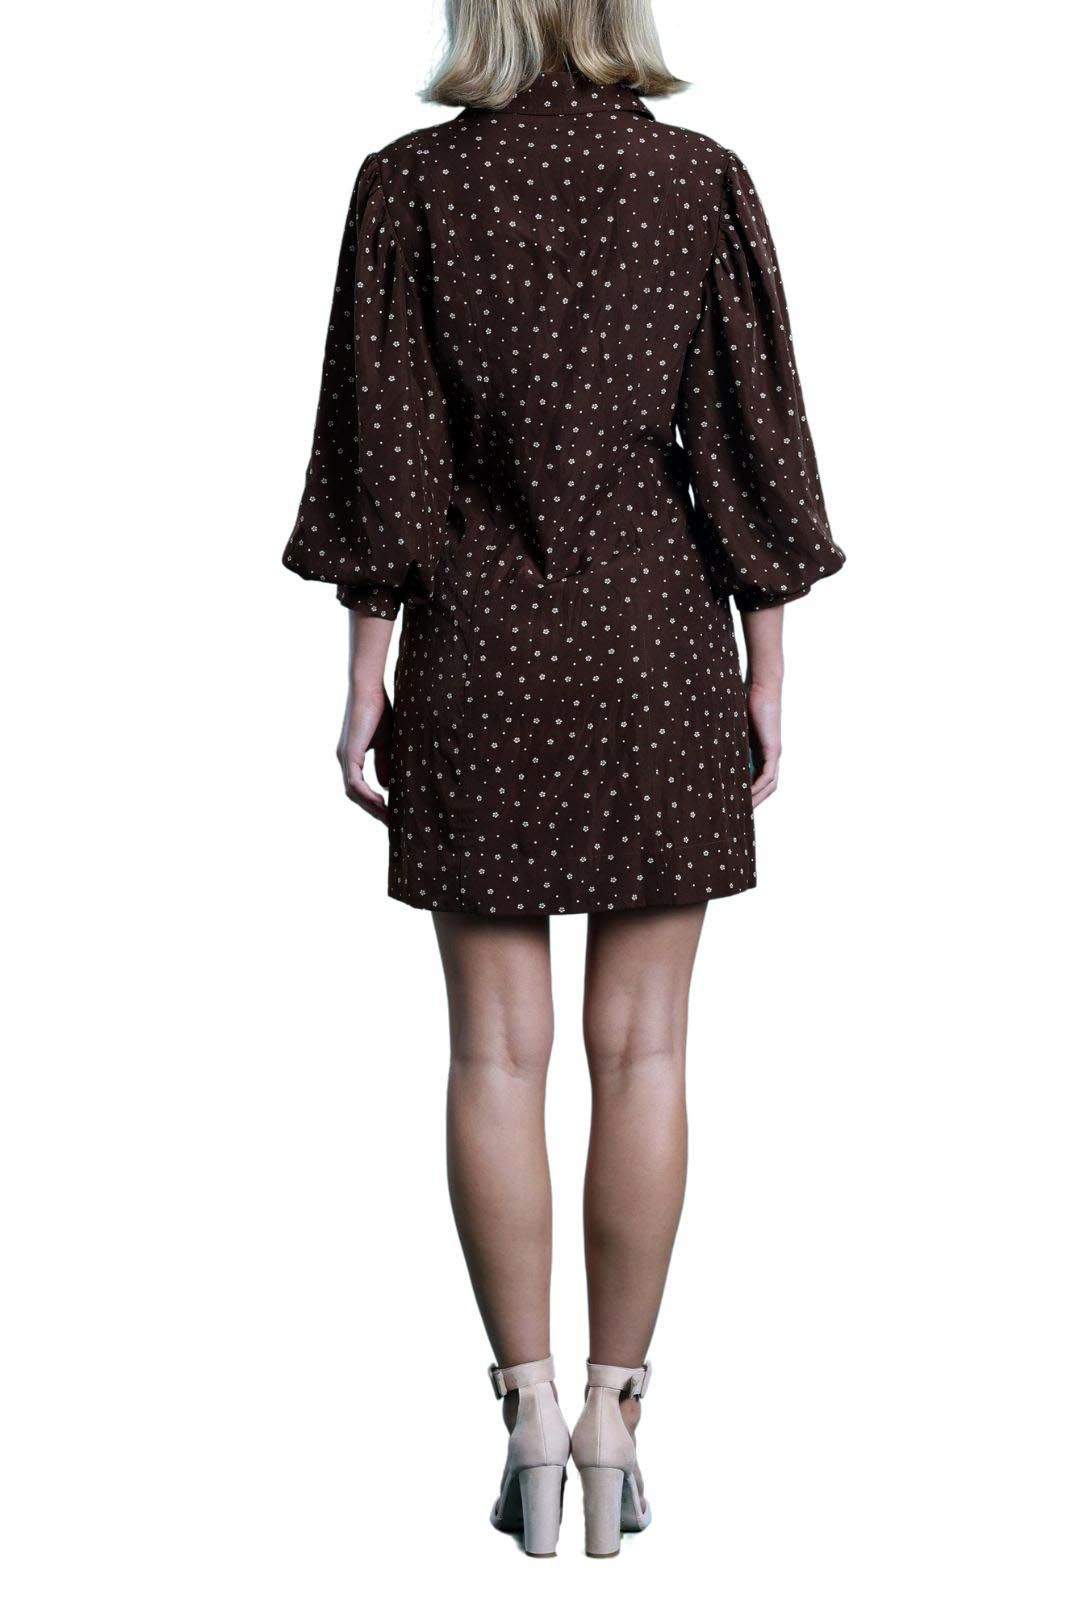 Daisy Says Brown Shirt Dress With Floral Print Mini